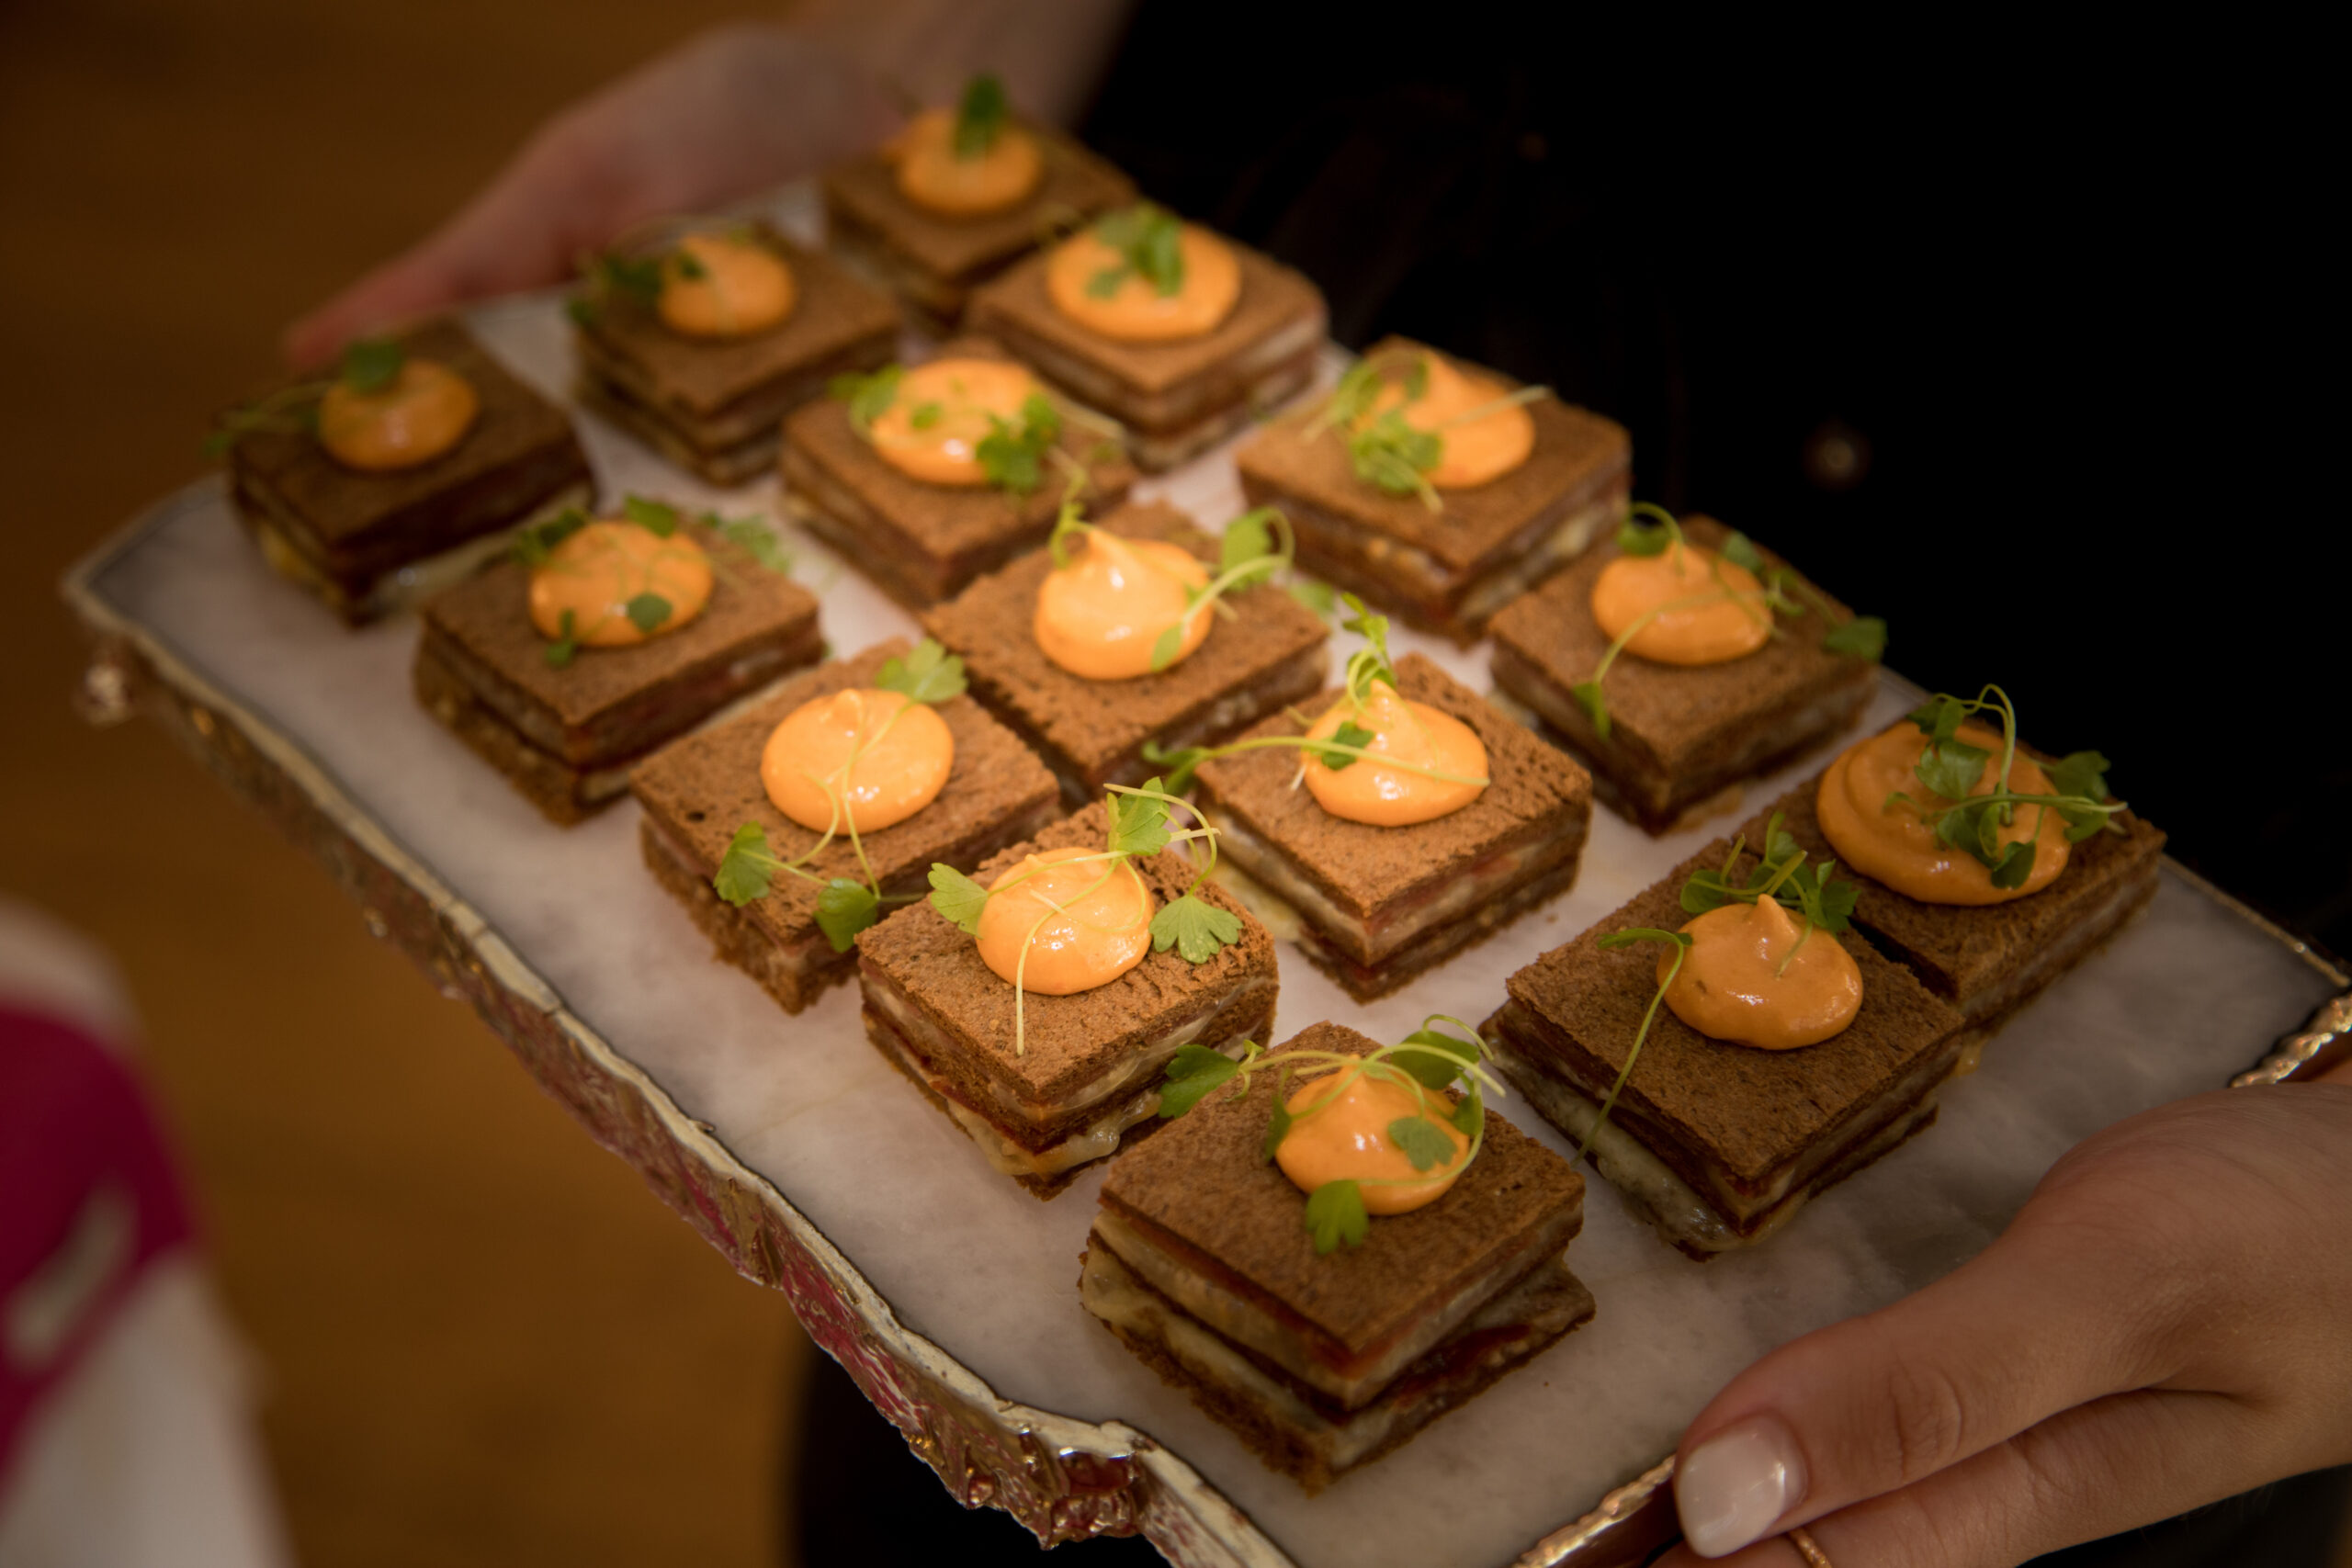 A tray of layered canapés displayed on a quartz gilded edged tray held by a waitress